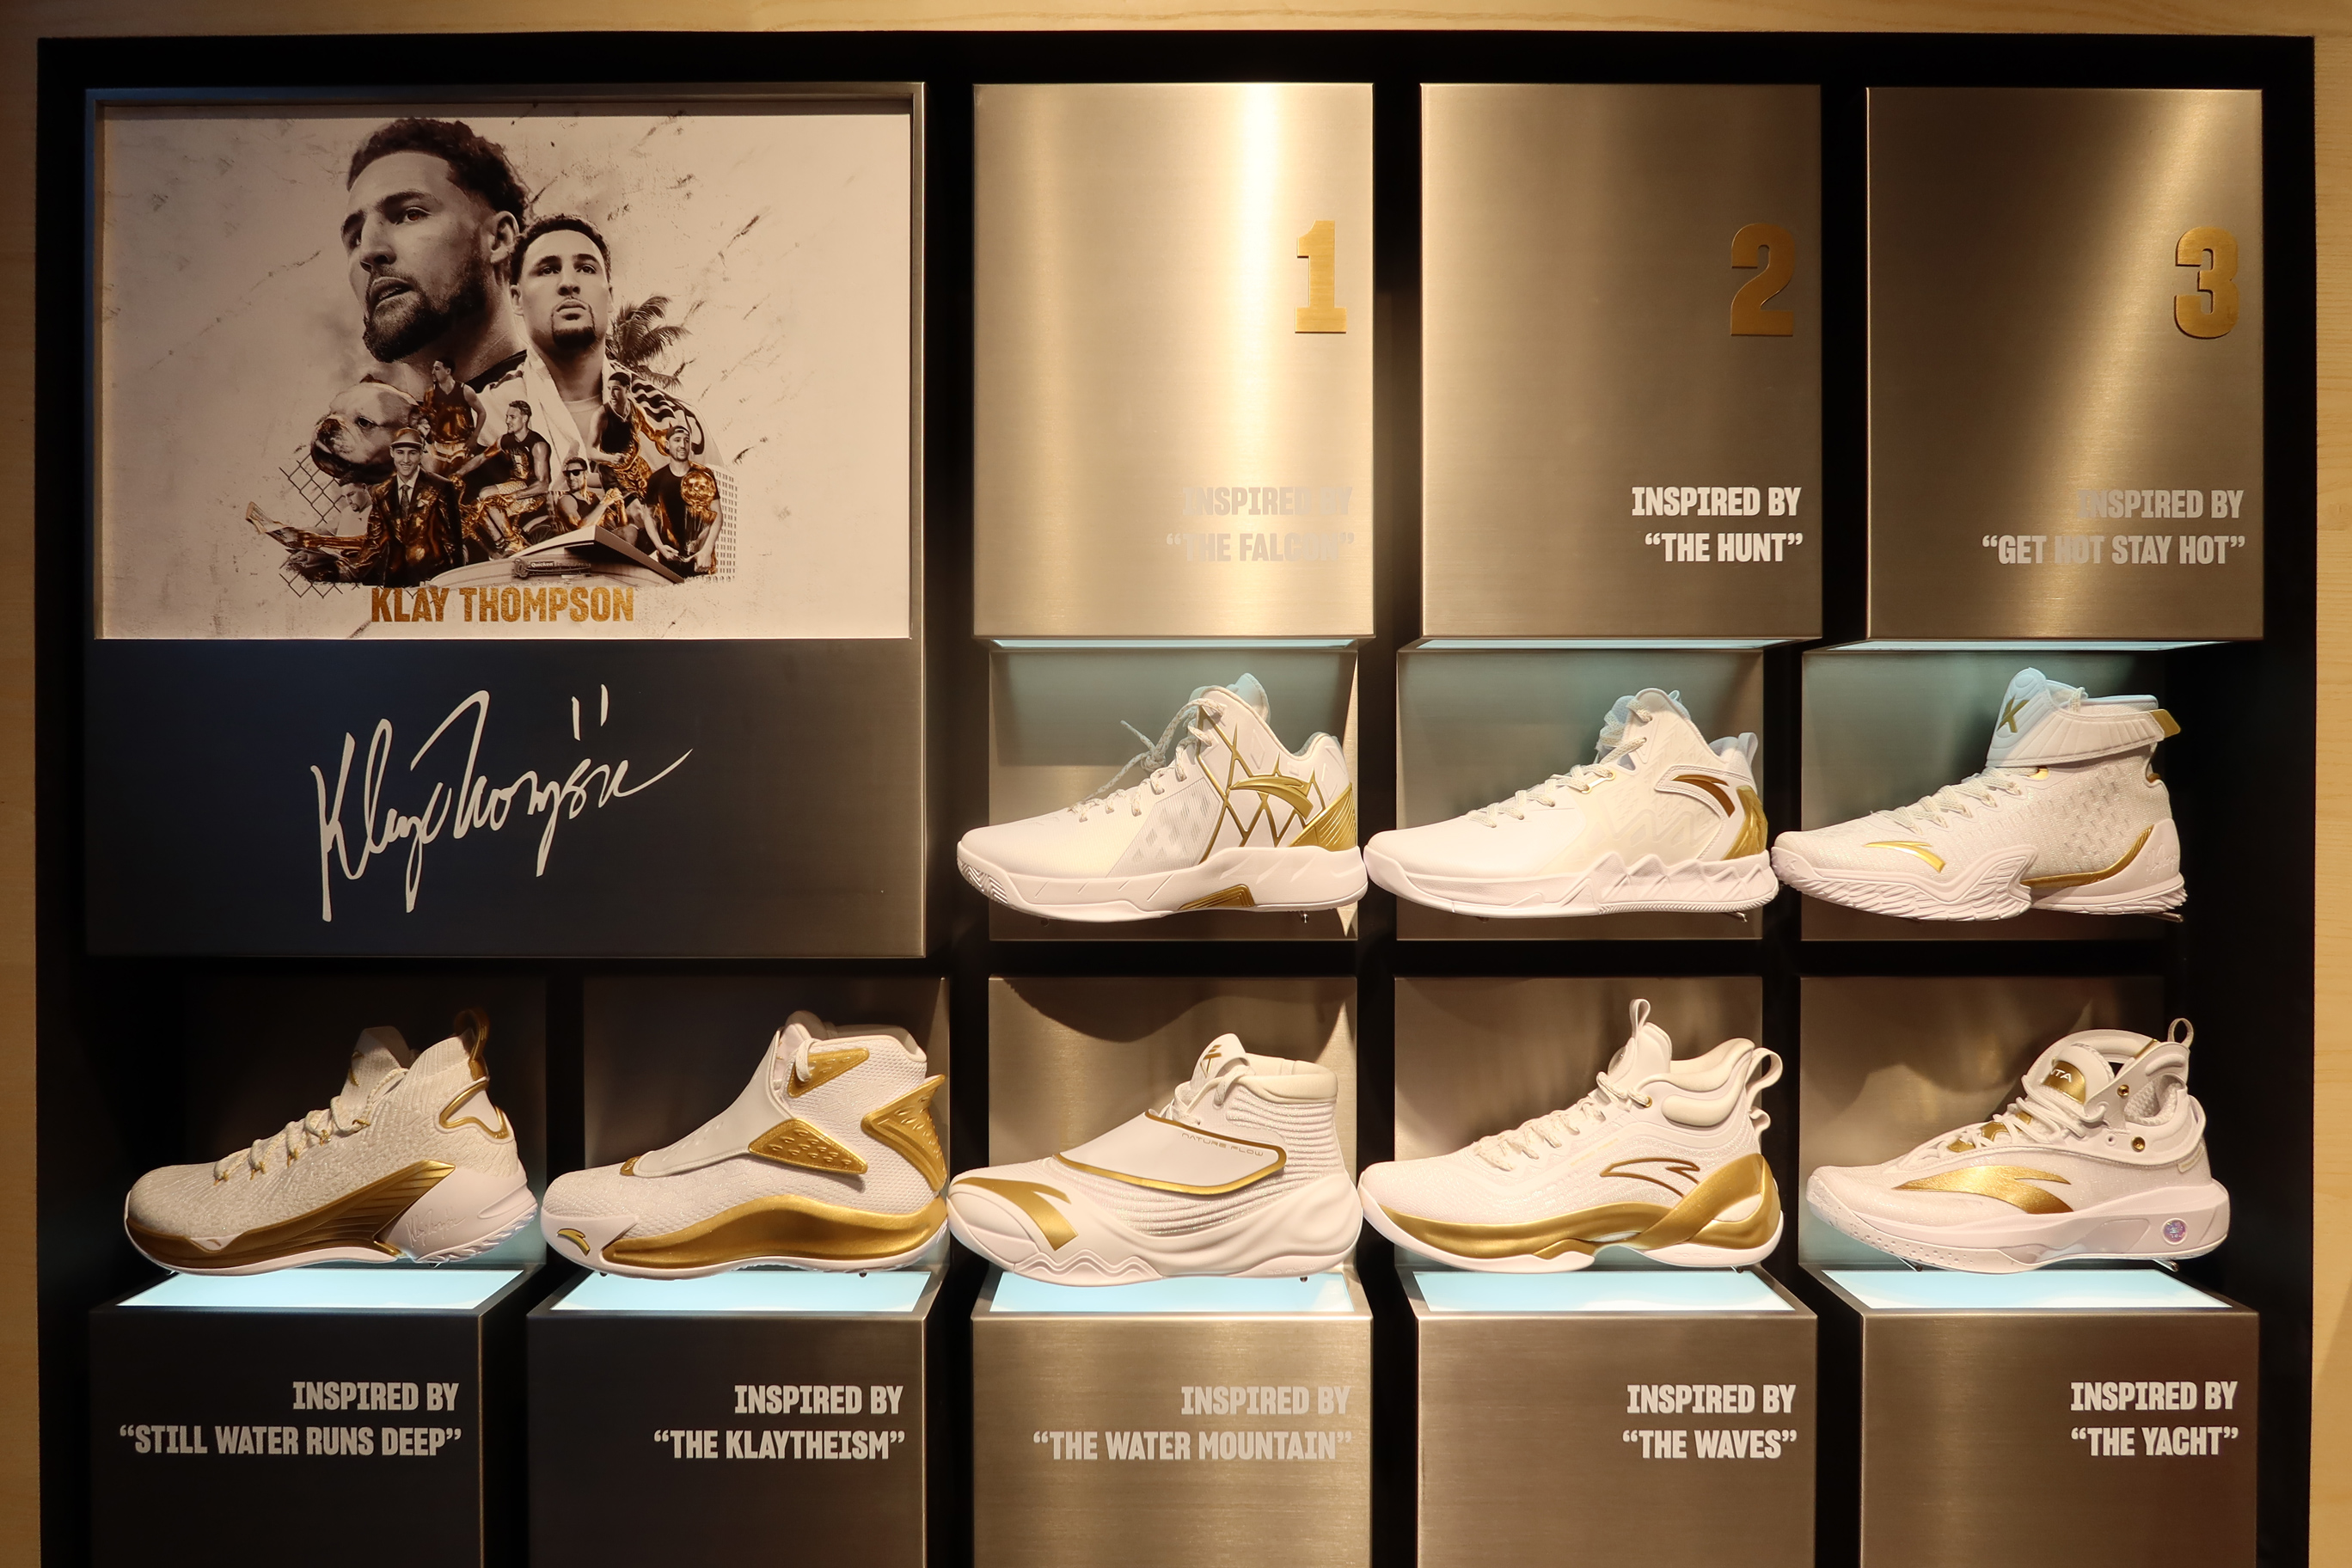 American basketball player, Klay Thompson's curated Wall of Fame displaying his own line of training sneakers.